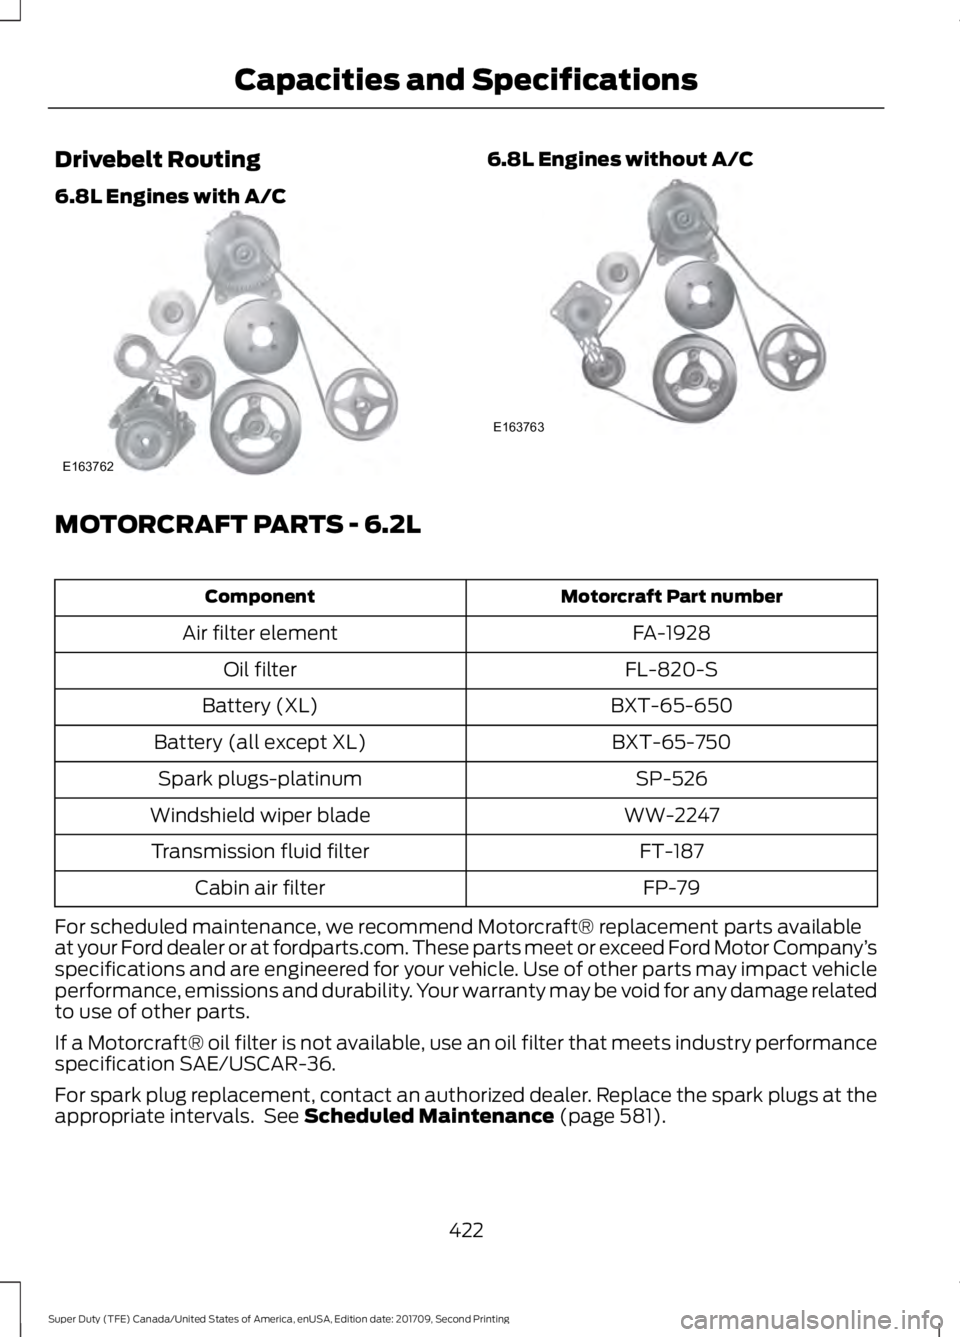 FORD F-450 2018  Owners Manual Drivebelt Routing
6.8L Engines with A/C 6.8L Engines without A/C
MOTORCRAFT PARTS - 6.2L
Motorcraft Part number
Component
FA-1928
Air filter element
FL-820-S
Oil filter
BXT-65-650
Battery (XL)
BXT-65-